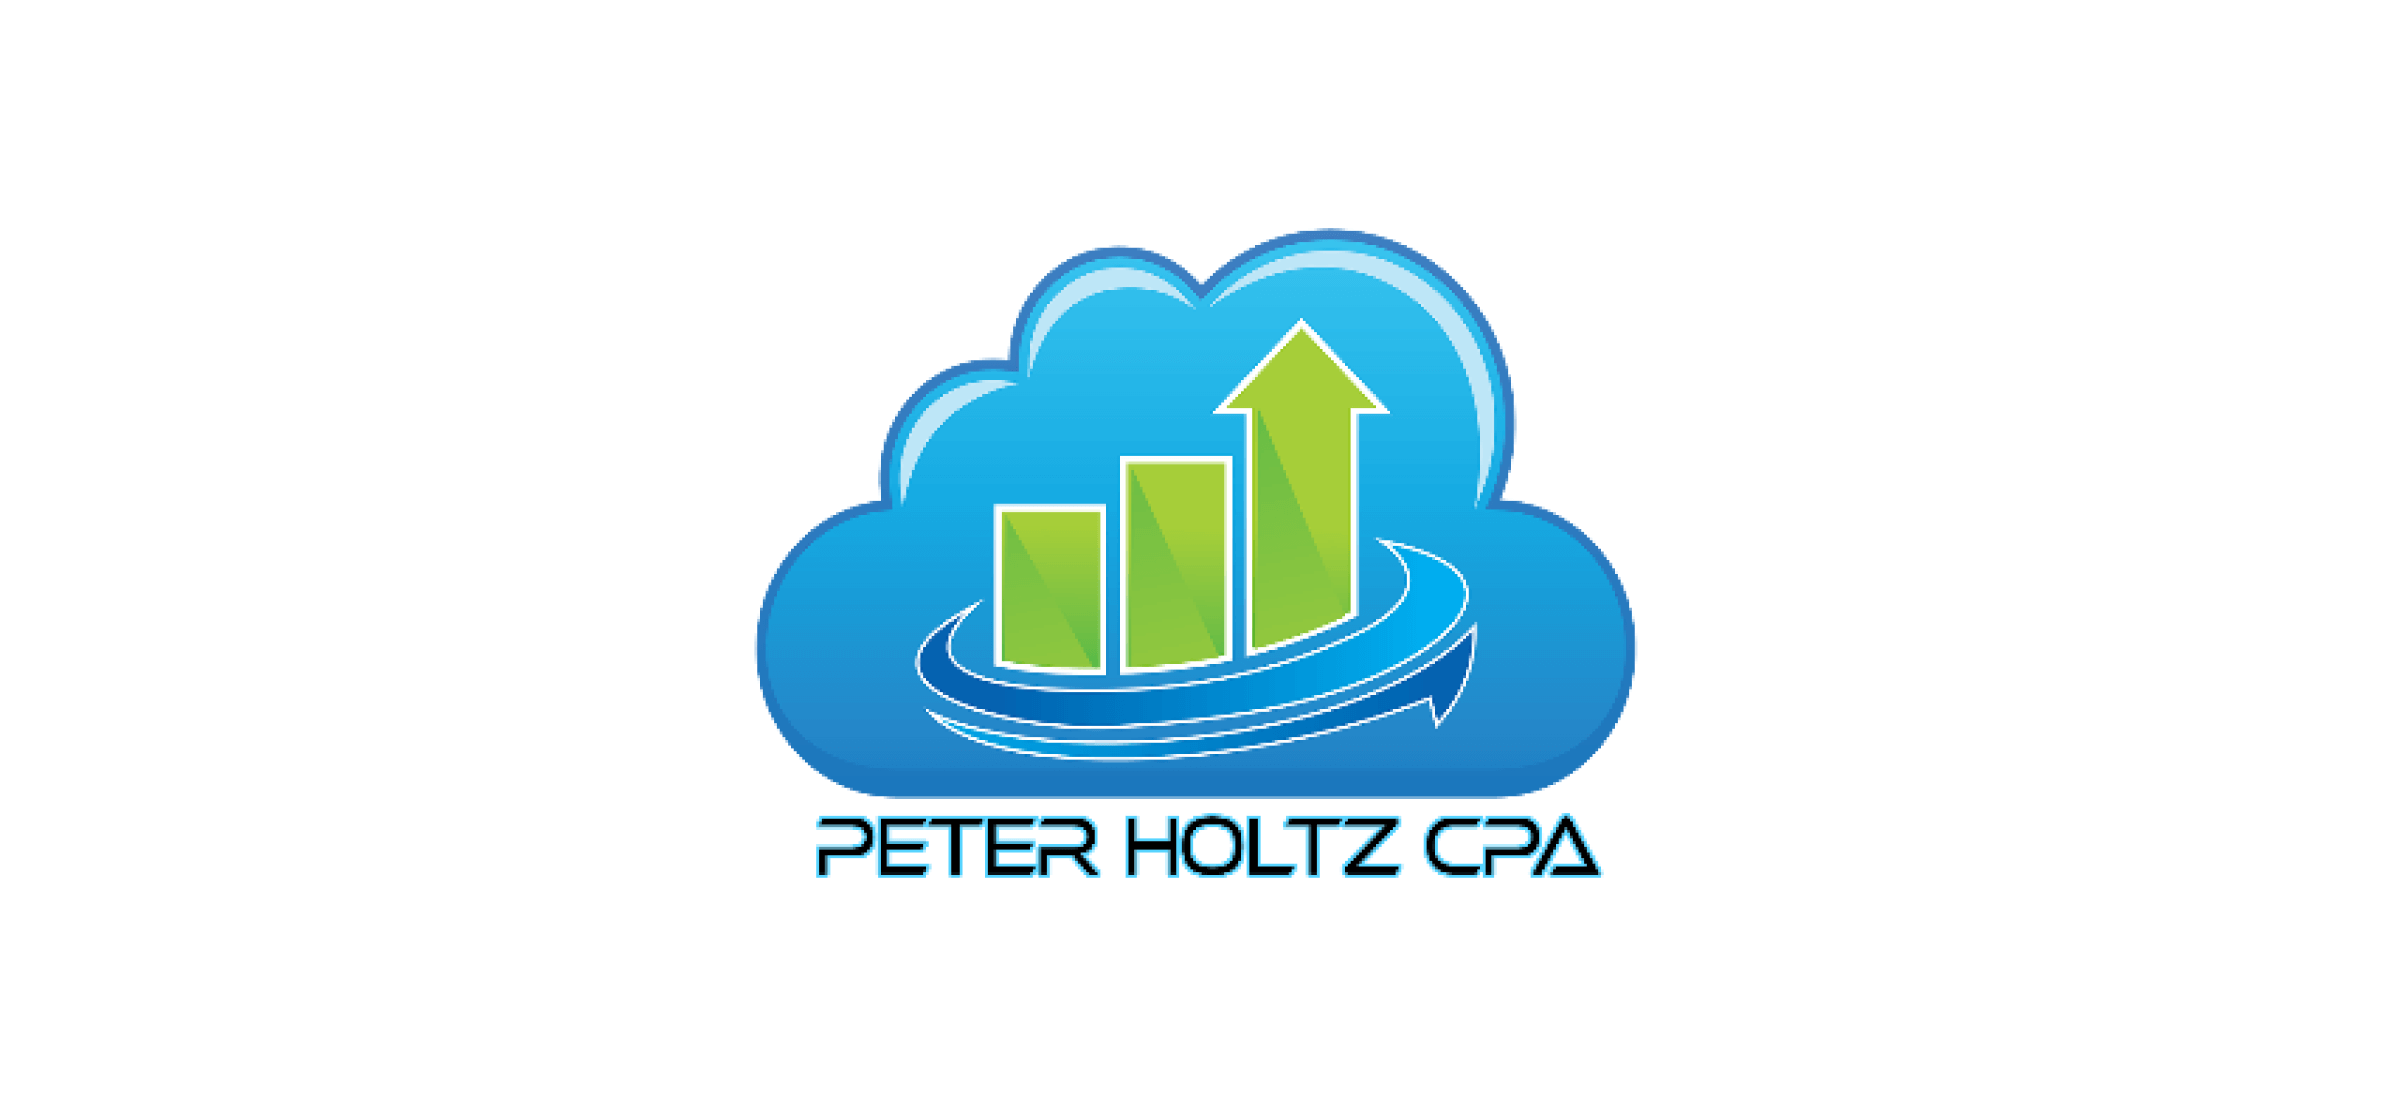 The Peter Holtz CPA logo